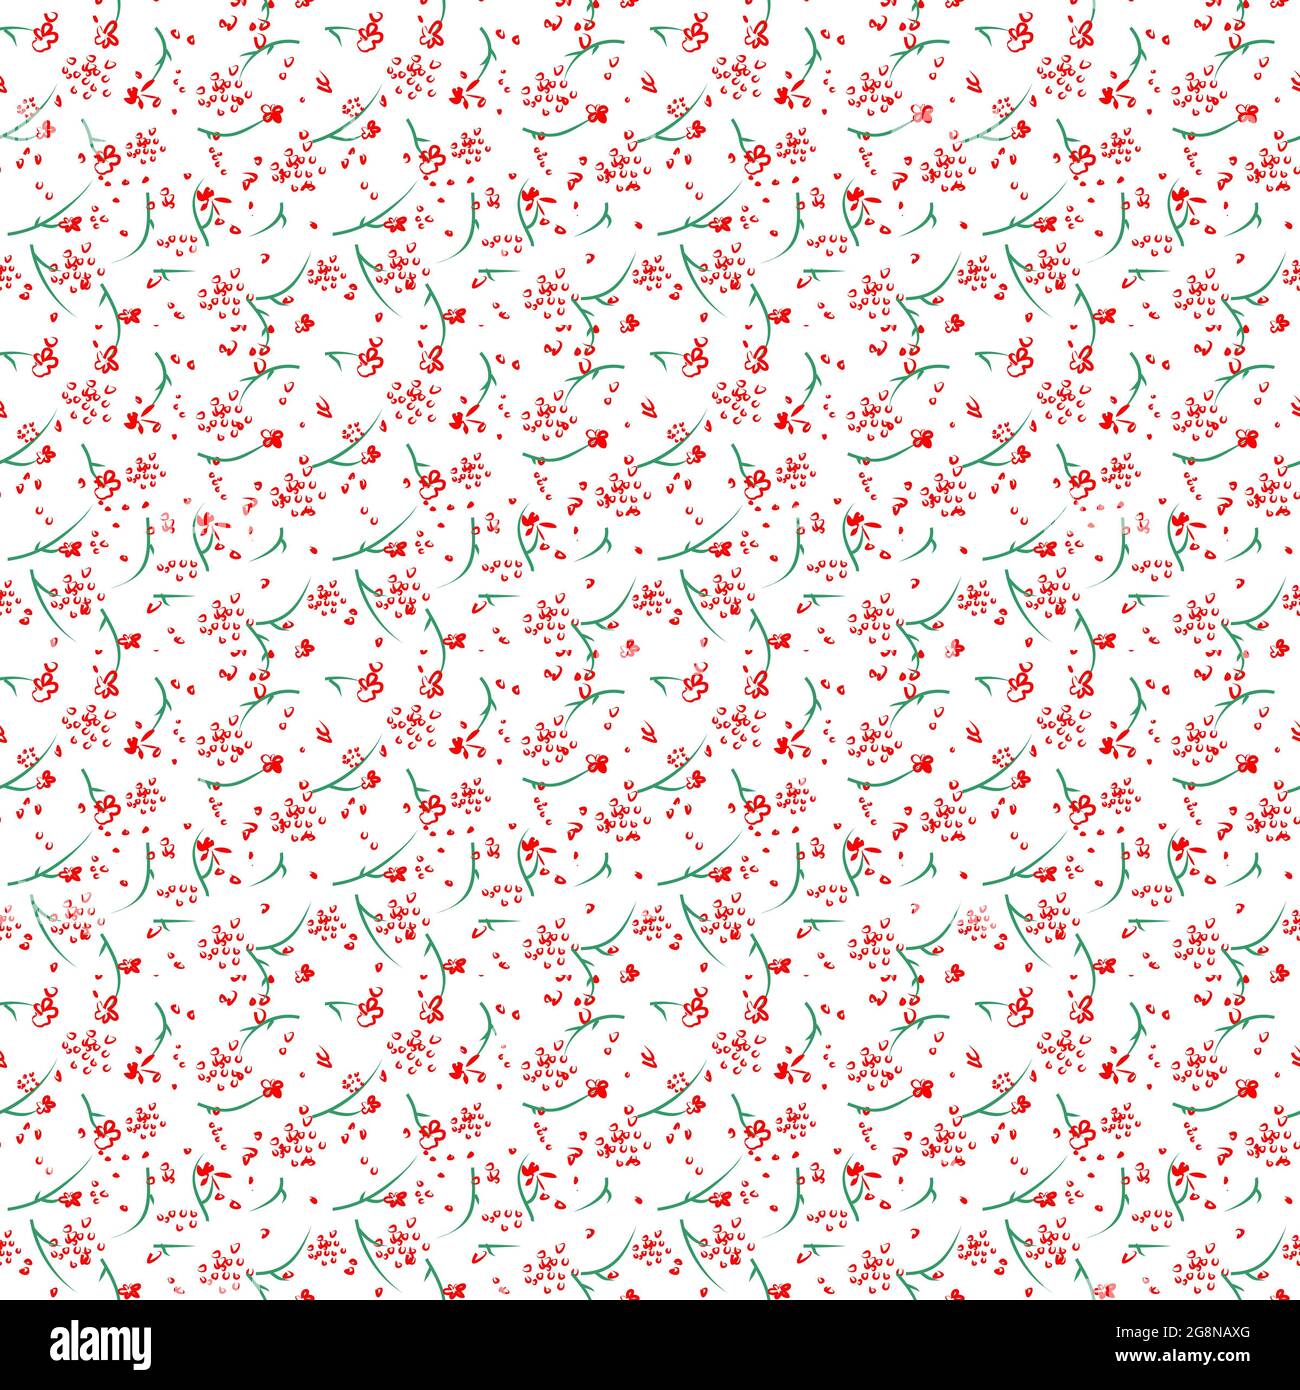 Beautiful flowers Seamless patterns for web, print, wallpaper, gift wrapping, home decor, fashion, invitation background, textile design. EPS vector f Stock Photo